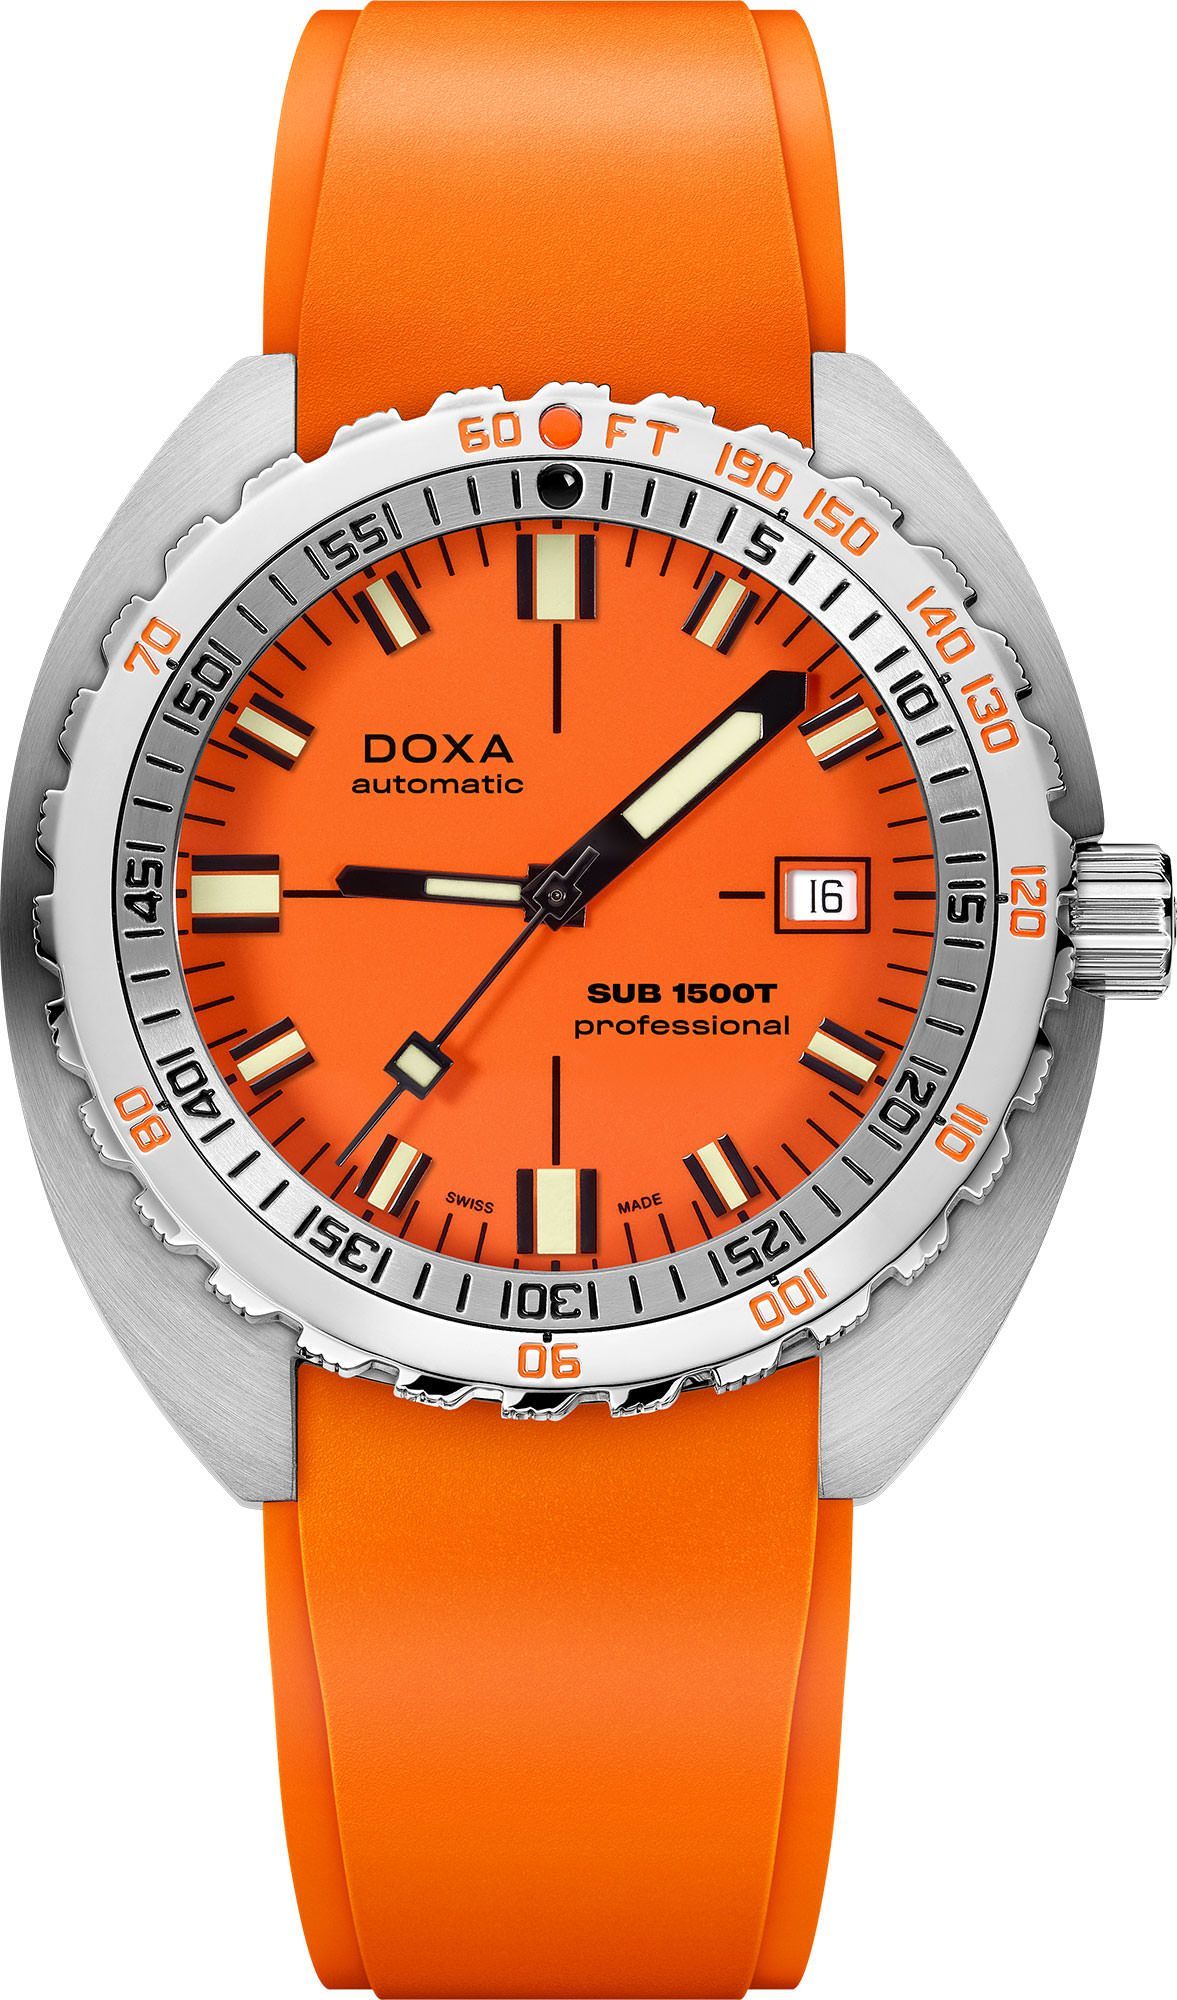 Doxa SUB 1500T Professional Orange Dial 45 mm Automatic Watch For Men - 1